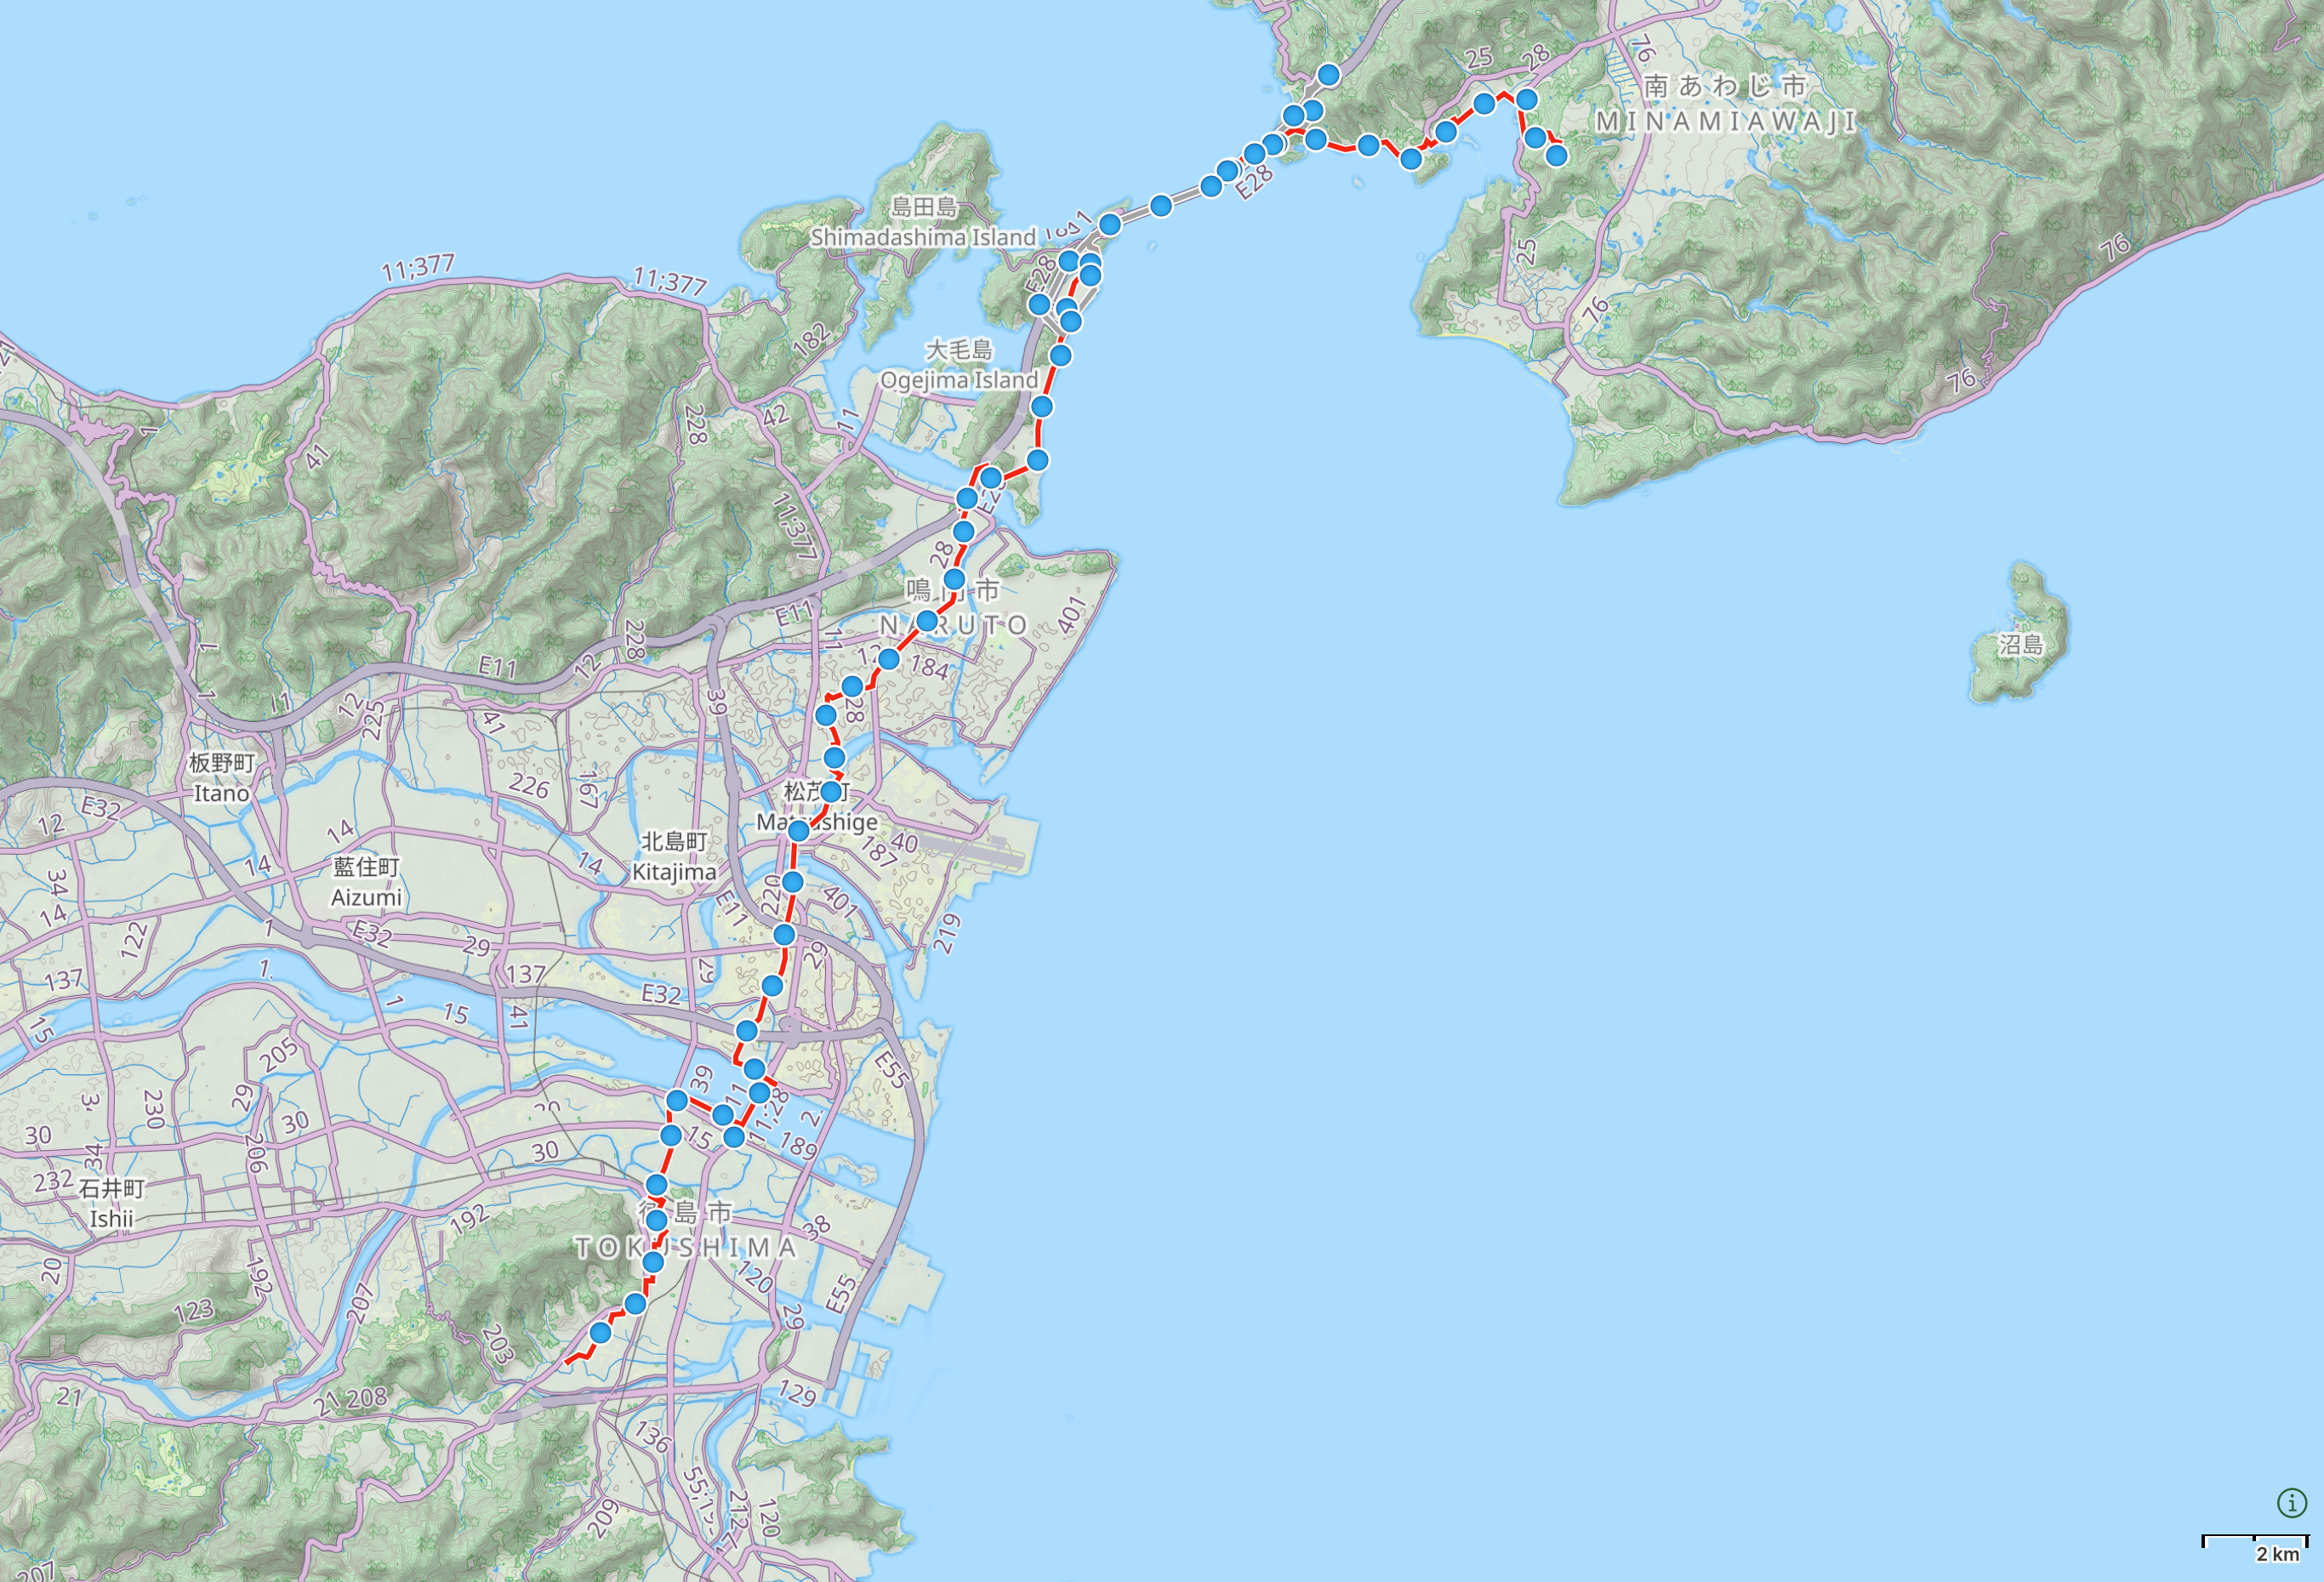 Map of Tokushima Prefecture and Awaji Island with author’s route between Tokushima City and Naruto highlighted.